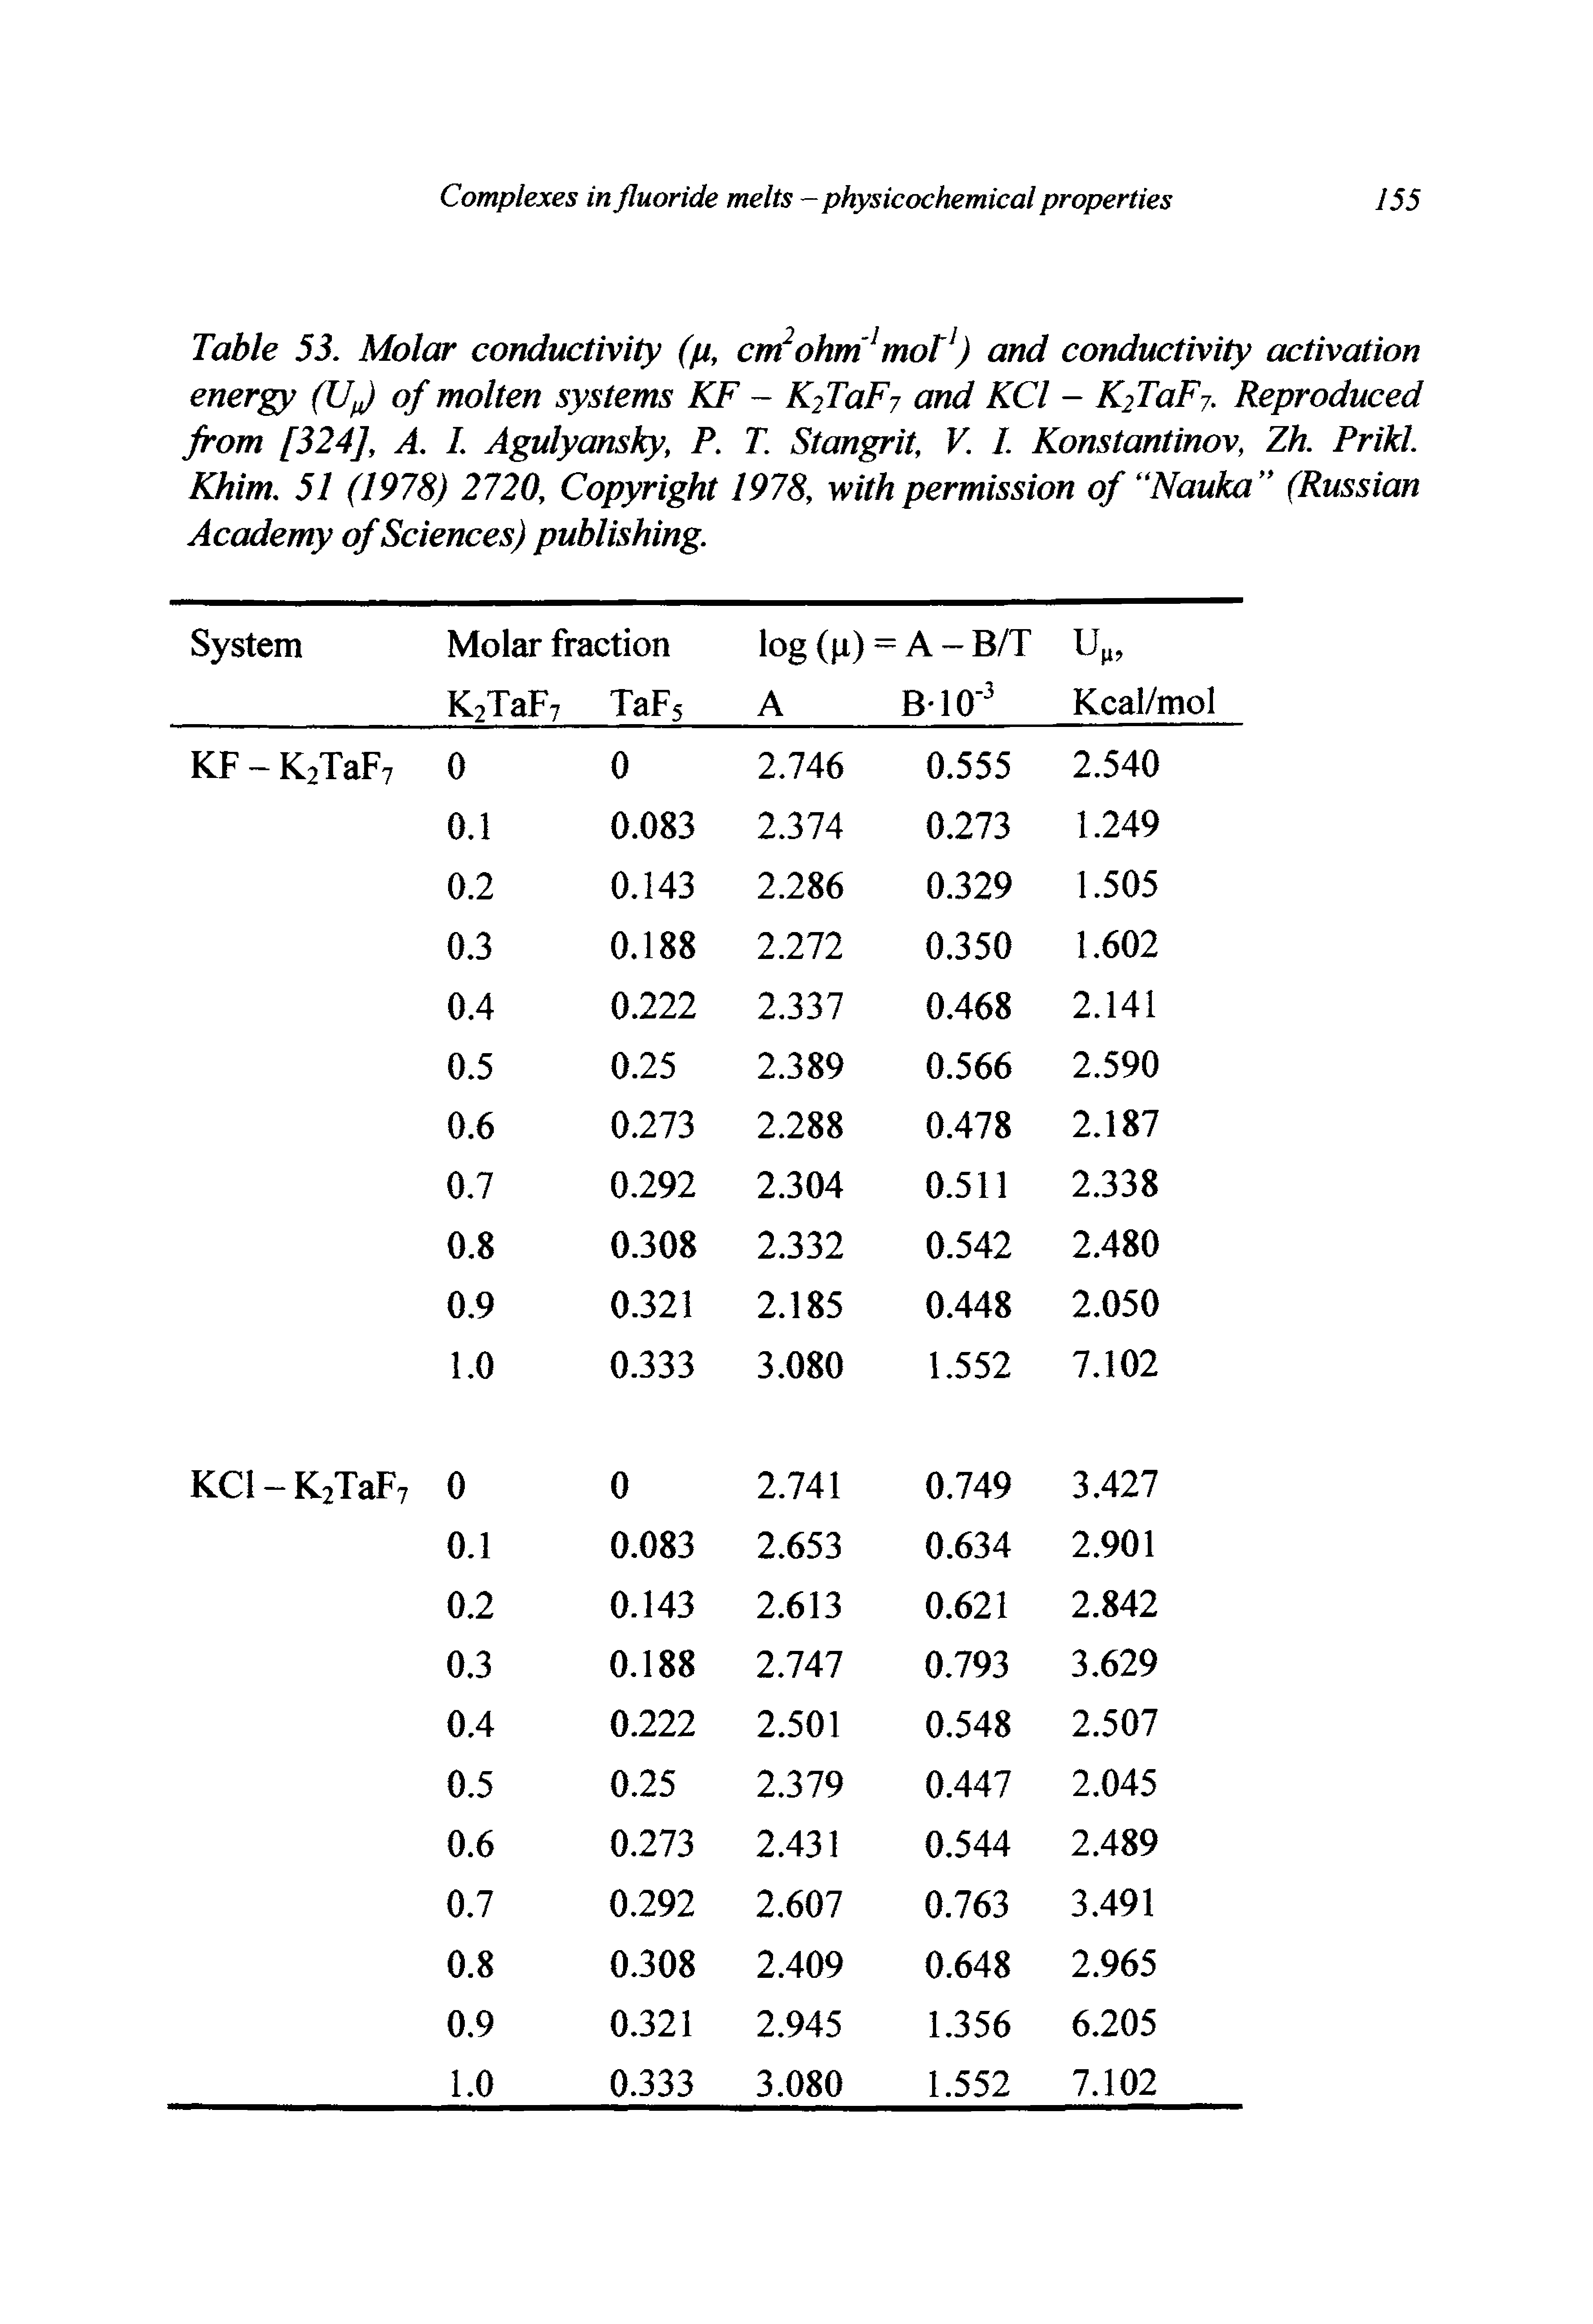 Table 53. Molar conductivity (p, cm2ohm mot1) and conductivity activation energy (U of molten systems KF - K2TaF7 and KCl - K2TaF7. Reproduced from [324], A. I. Agulyansky, P. T. Stangrit, V. I. Konstantinov, Zh. Prikl. Khim. 51 (1978) 2720, Copyright 1978, with permission of Nauka (Russian Academy of Sciences) publishing.